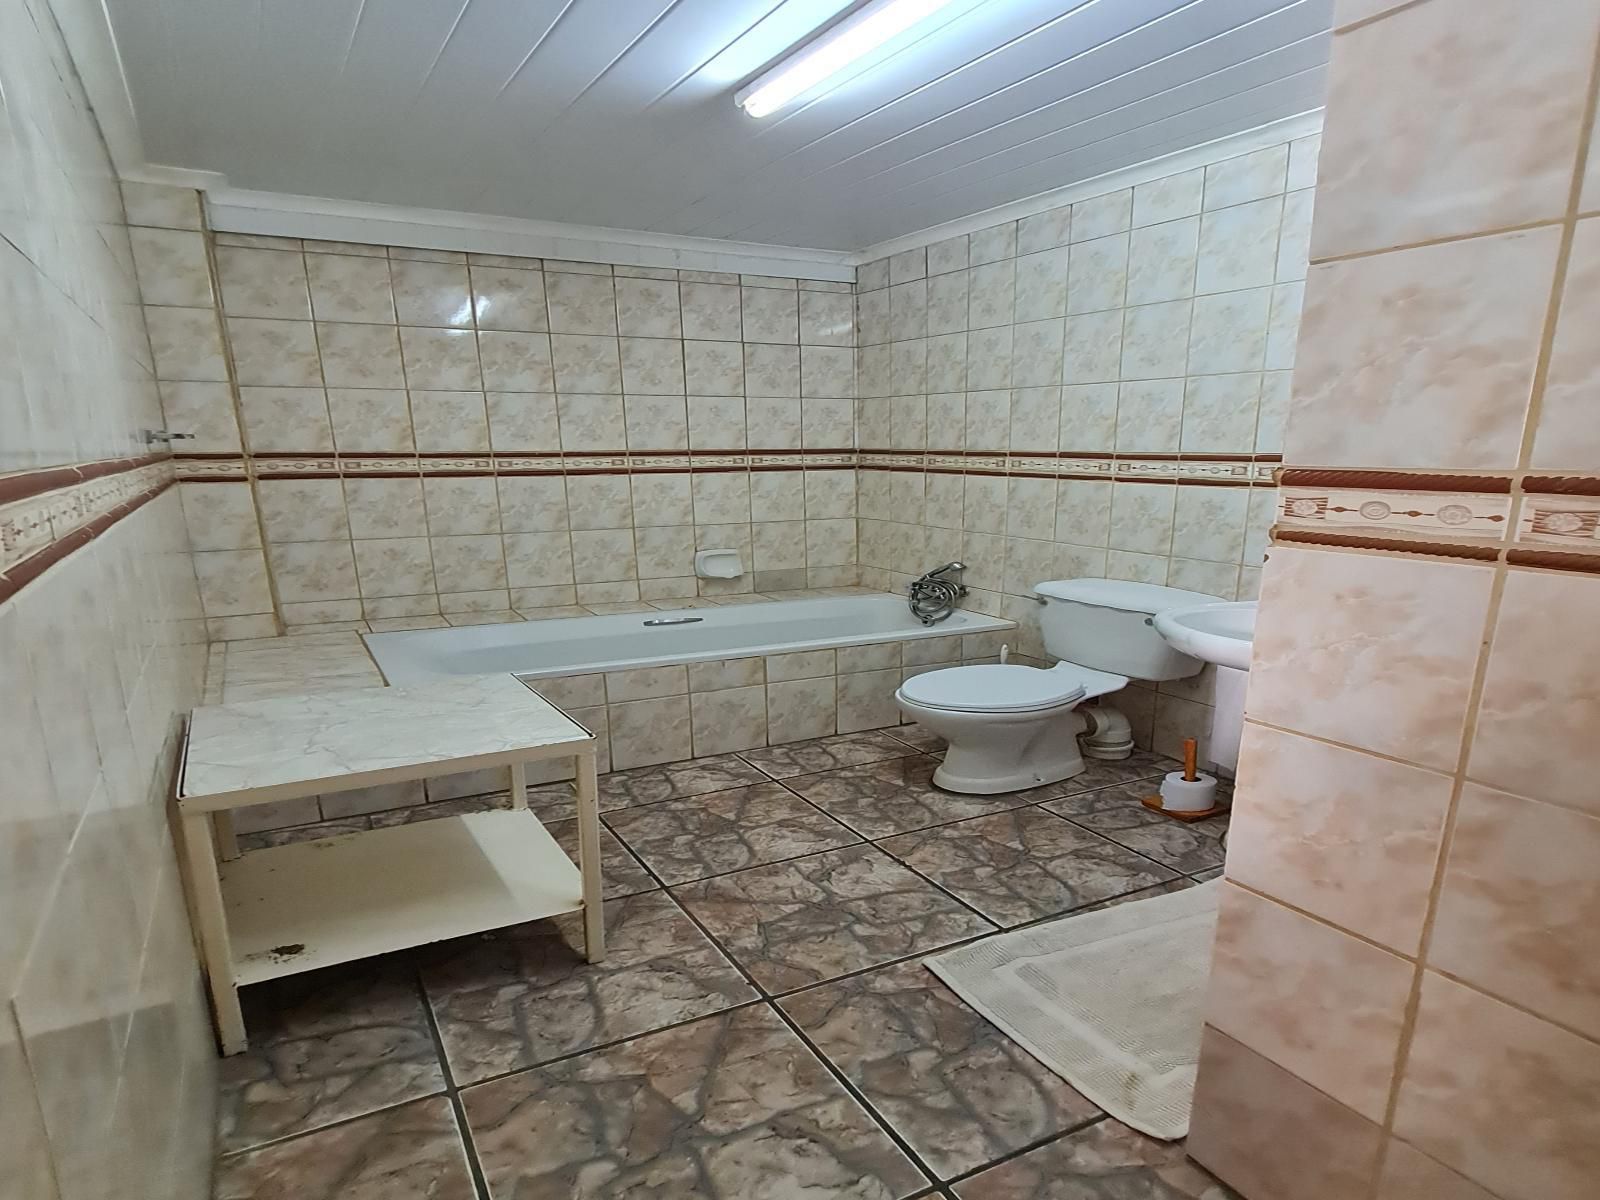 N4 Guest Lodge Rustenburg North West Province South Africa Unsaturated, Bathroom